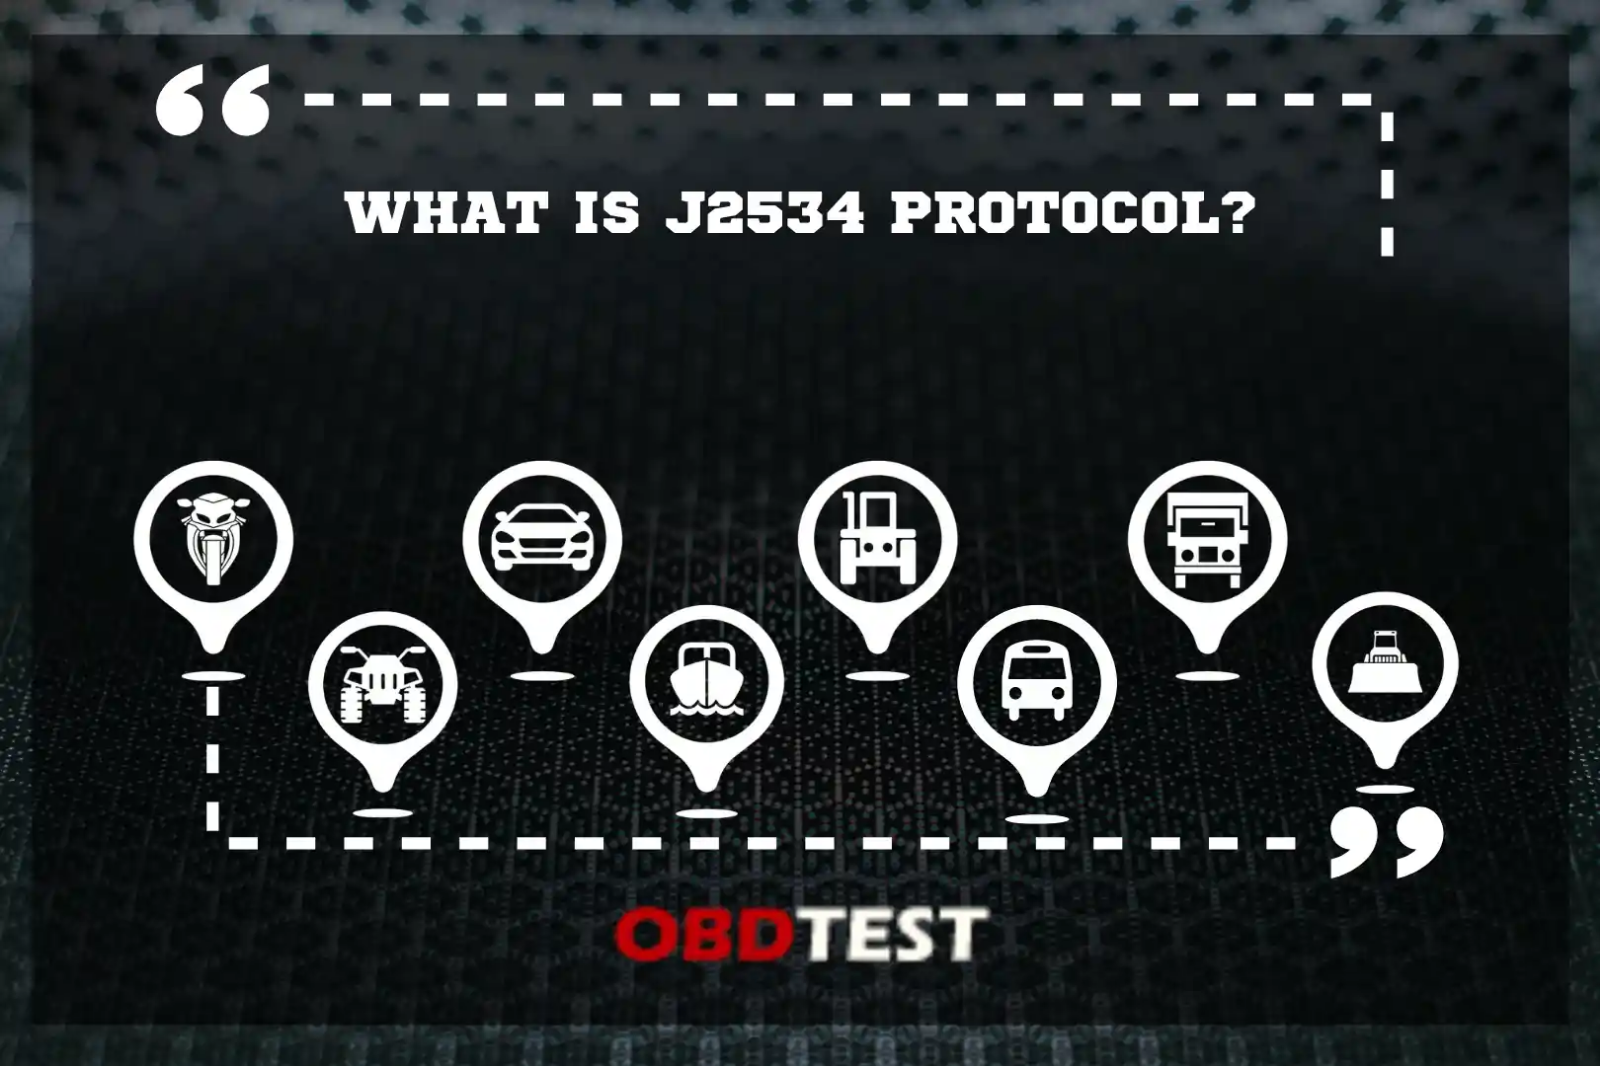 What is J2534 protocol?